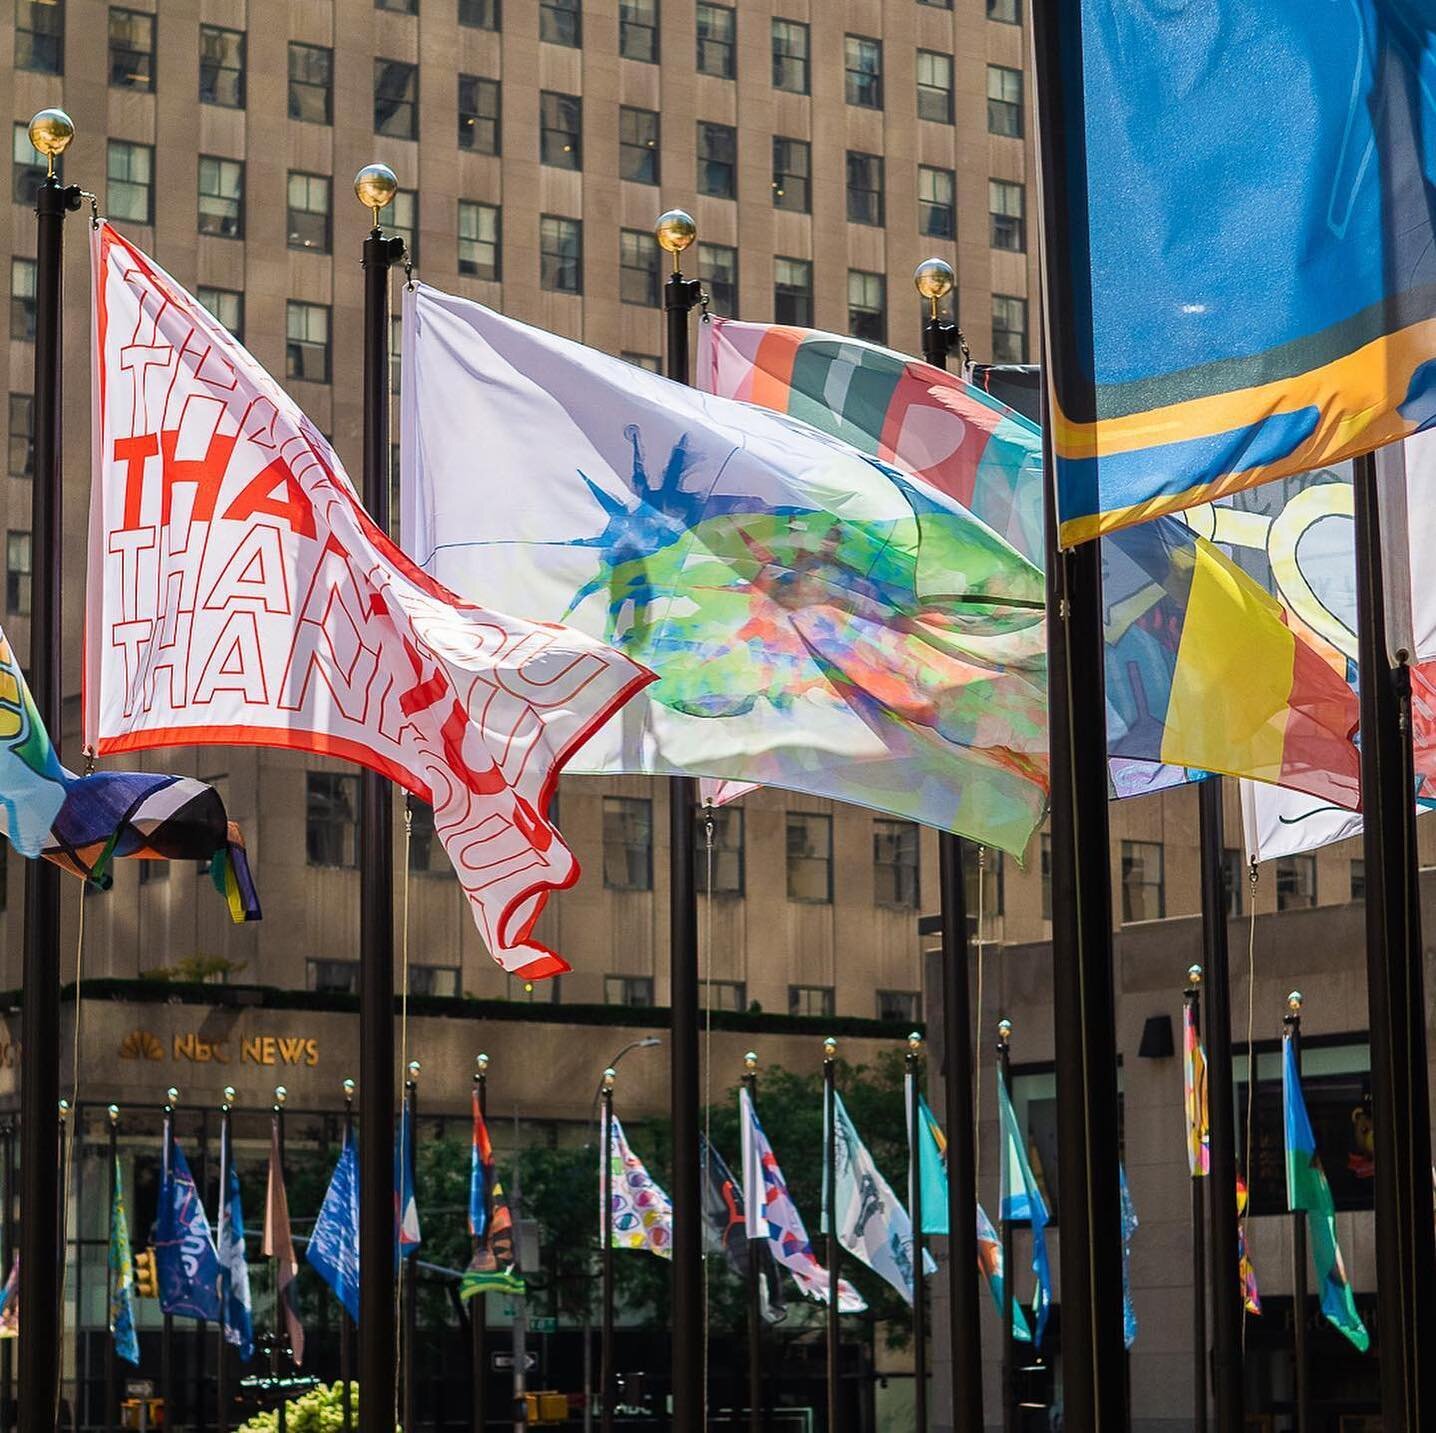 Congrats @giostudio108  Denise Giordano for being a part of #rockefellercenterflagproject - looks amazing! Have fun flying high! Photo credit @bigafromedia